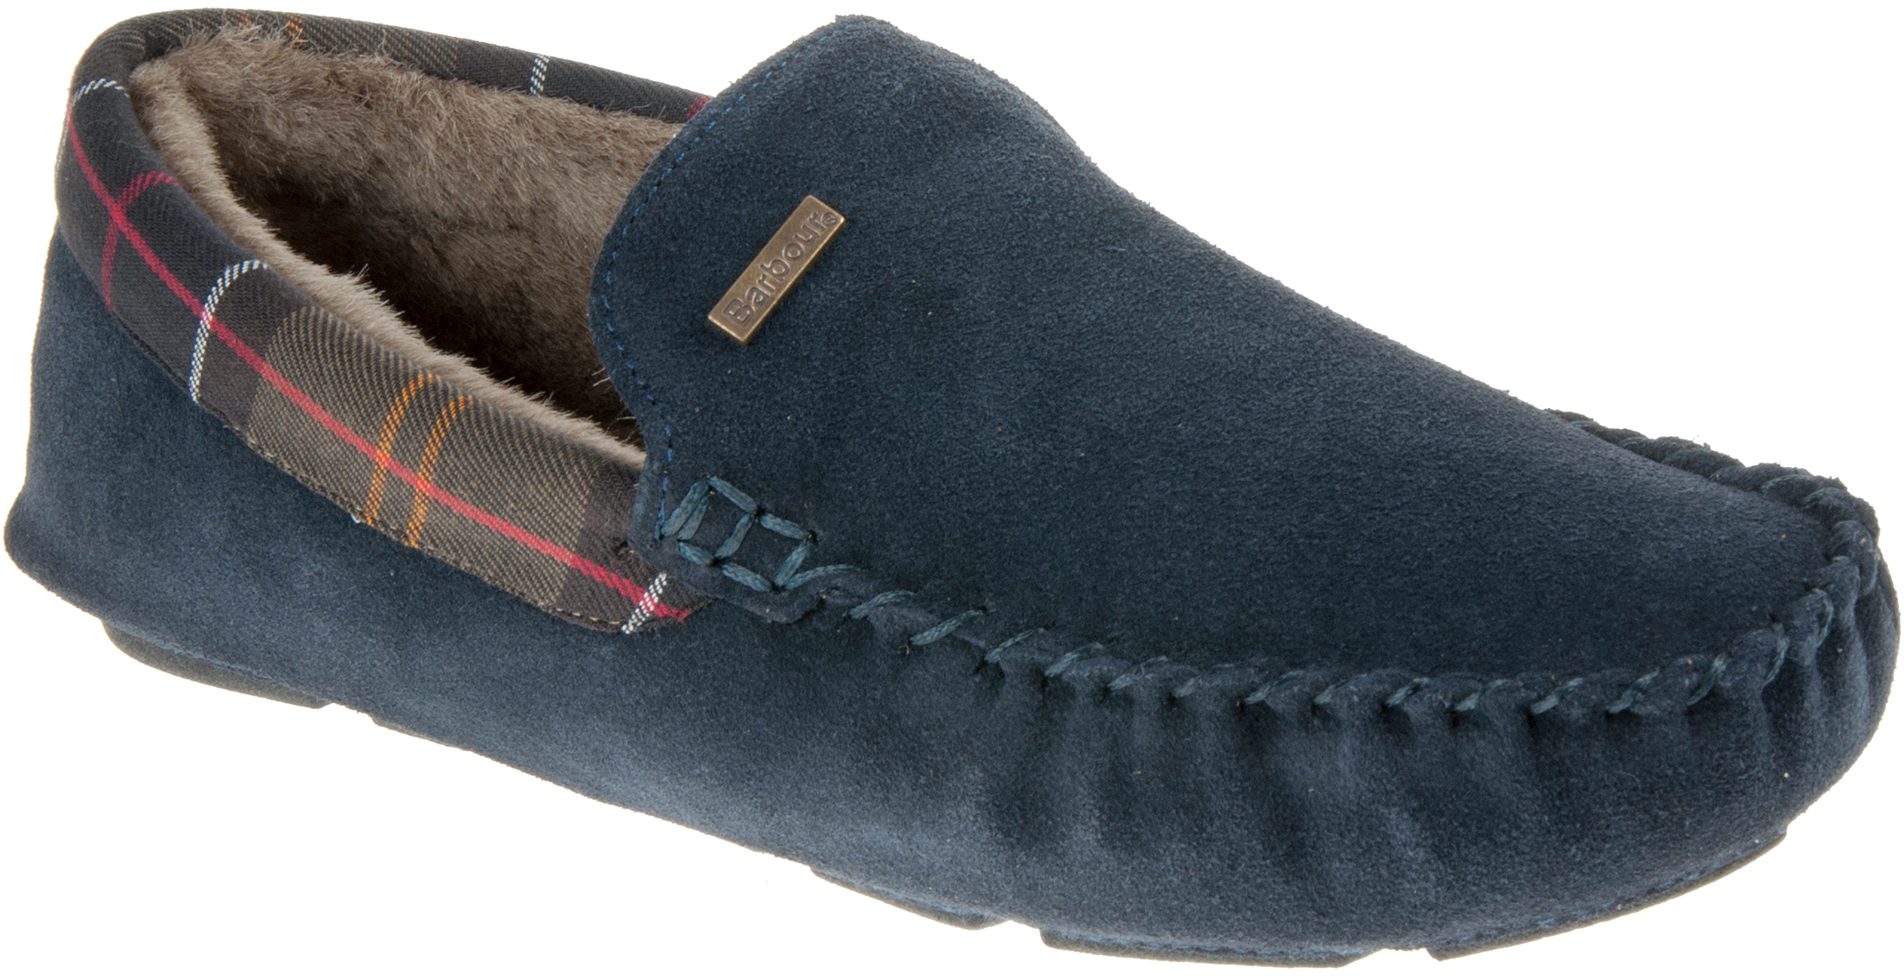 Barbour Monty Navy Blue MSL0001NY52 - Full Slippers - Humphries Shoes